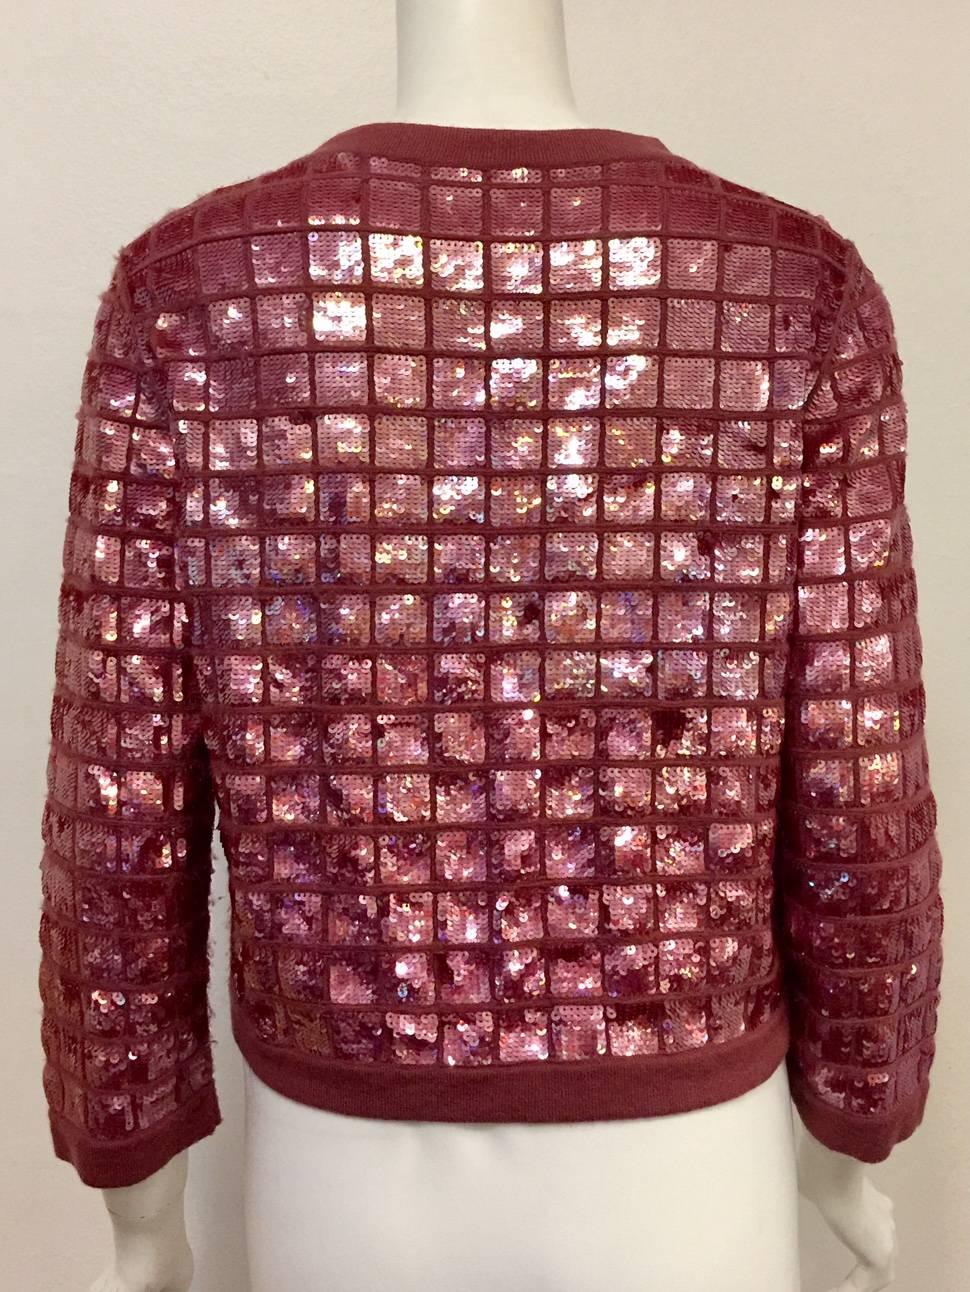 Brown 2008 Chanel Med. Burgundy Cashmere Cardigan Iridescent Sequin Embroidery 